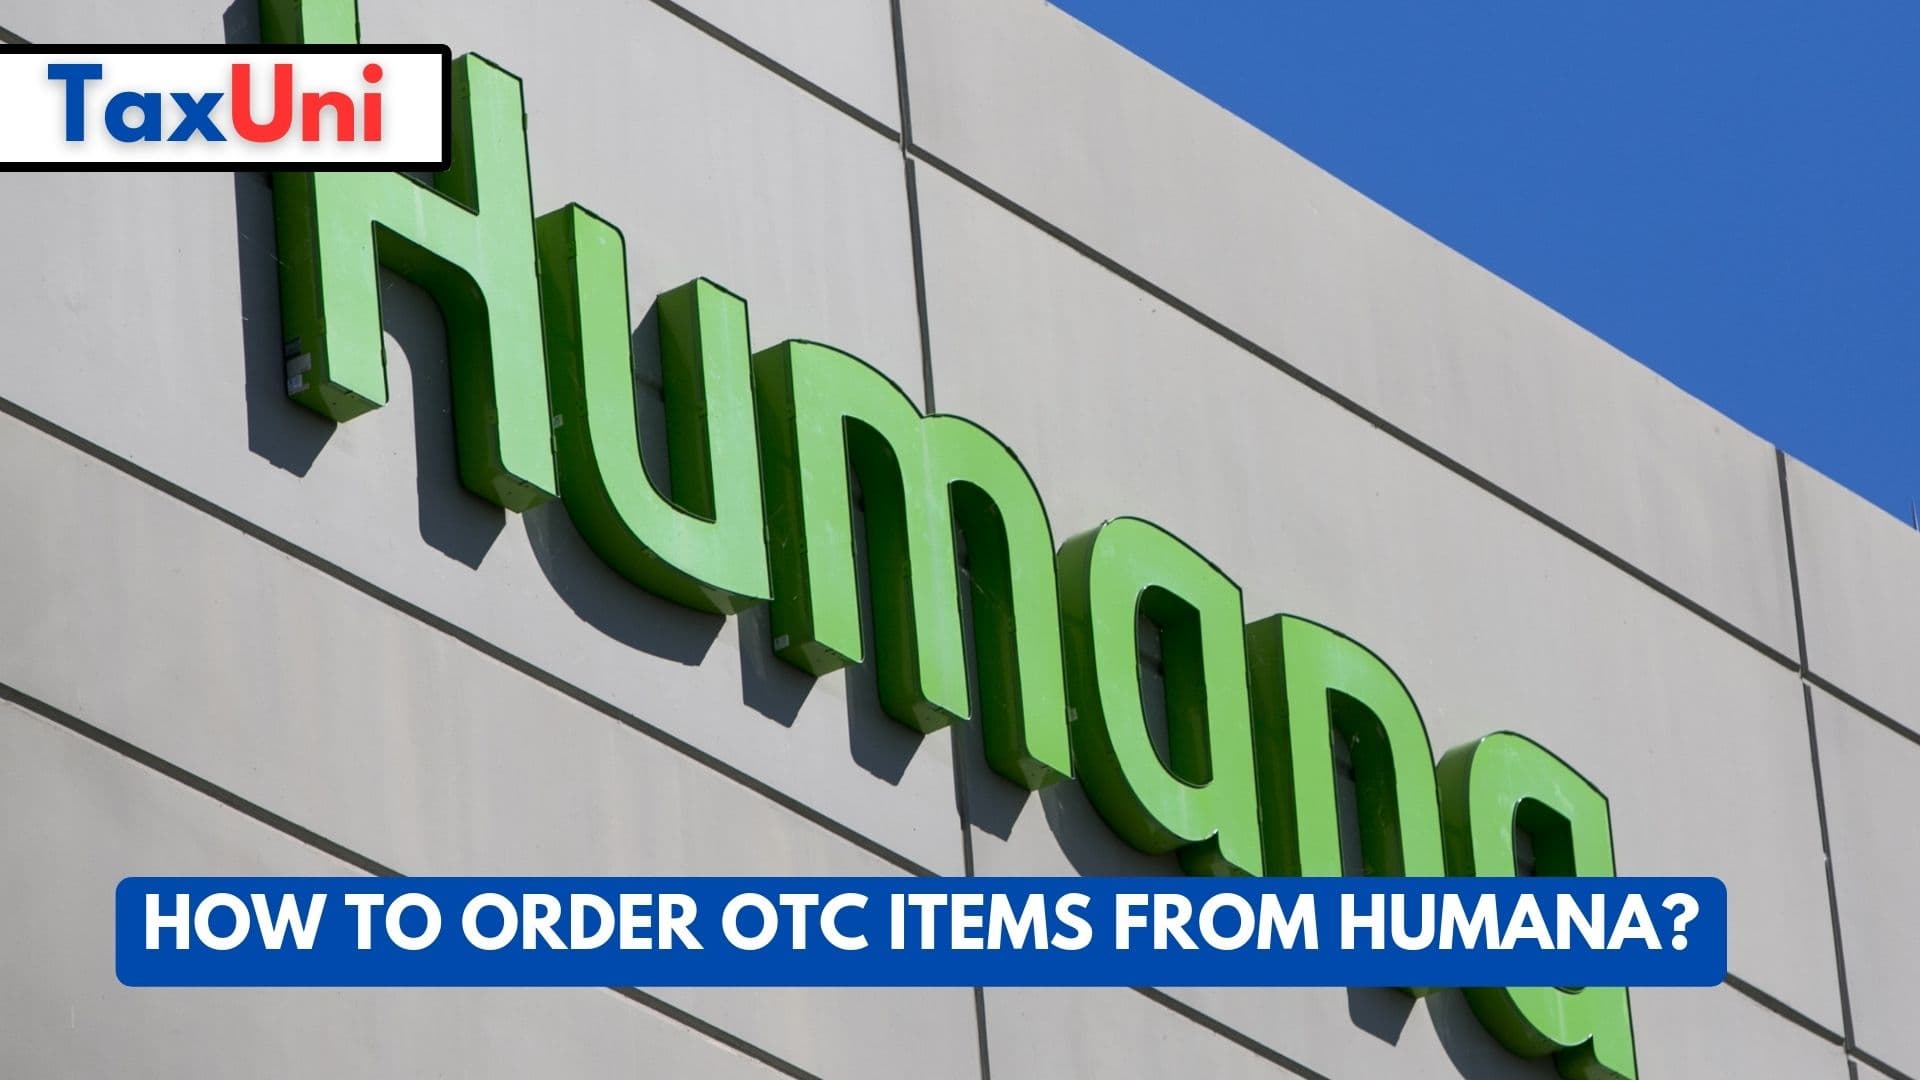 How to Order OTC Items From Humana?